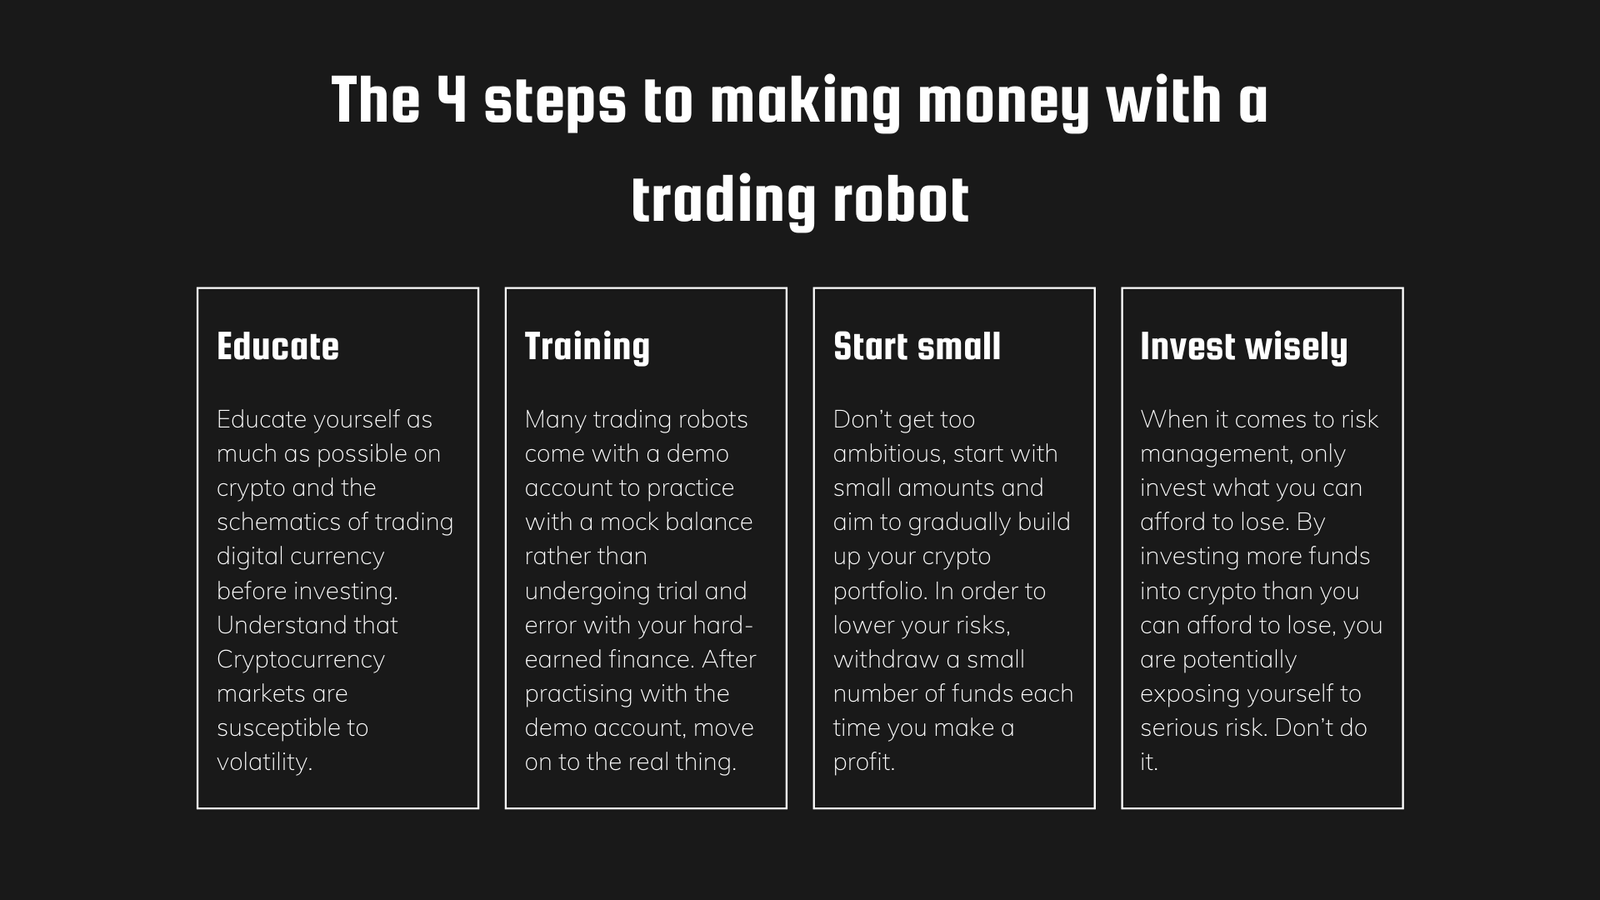 Bitcoin Digital Review - The 4 Steps to making money with a trading bot